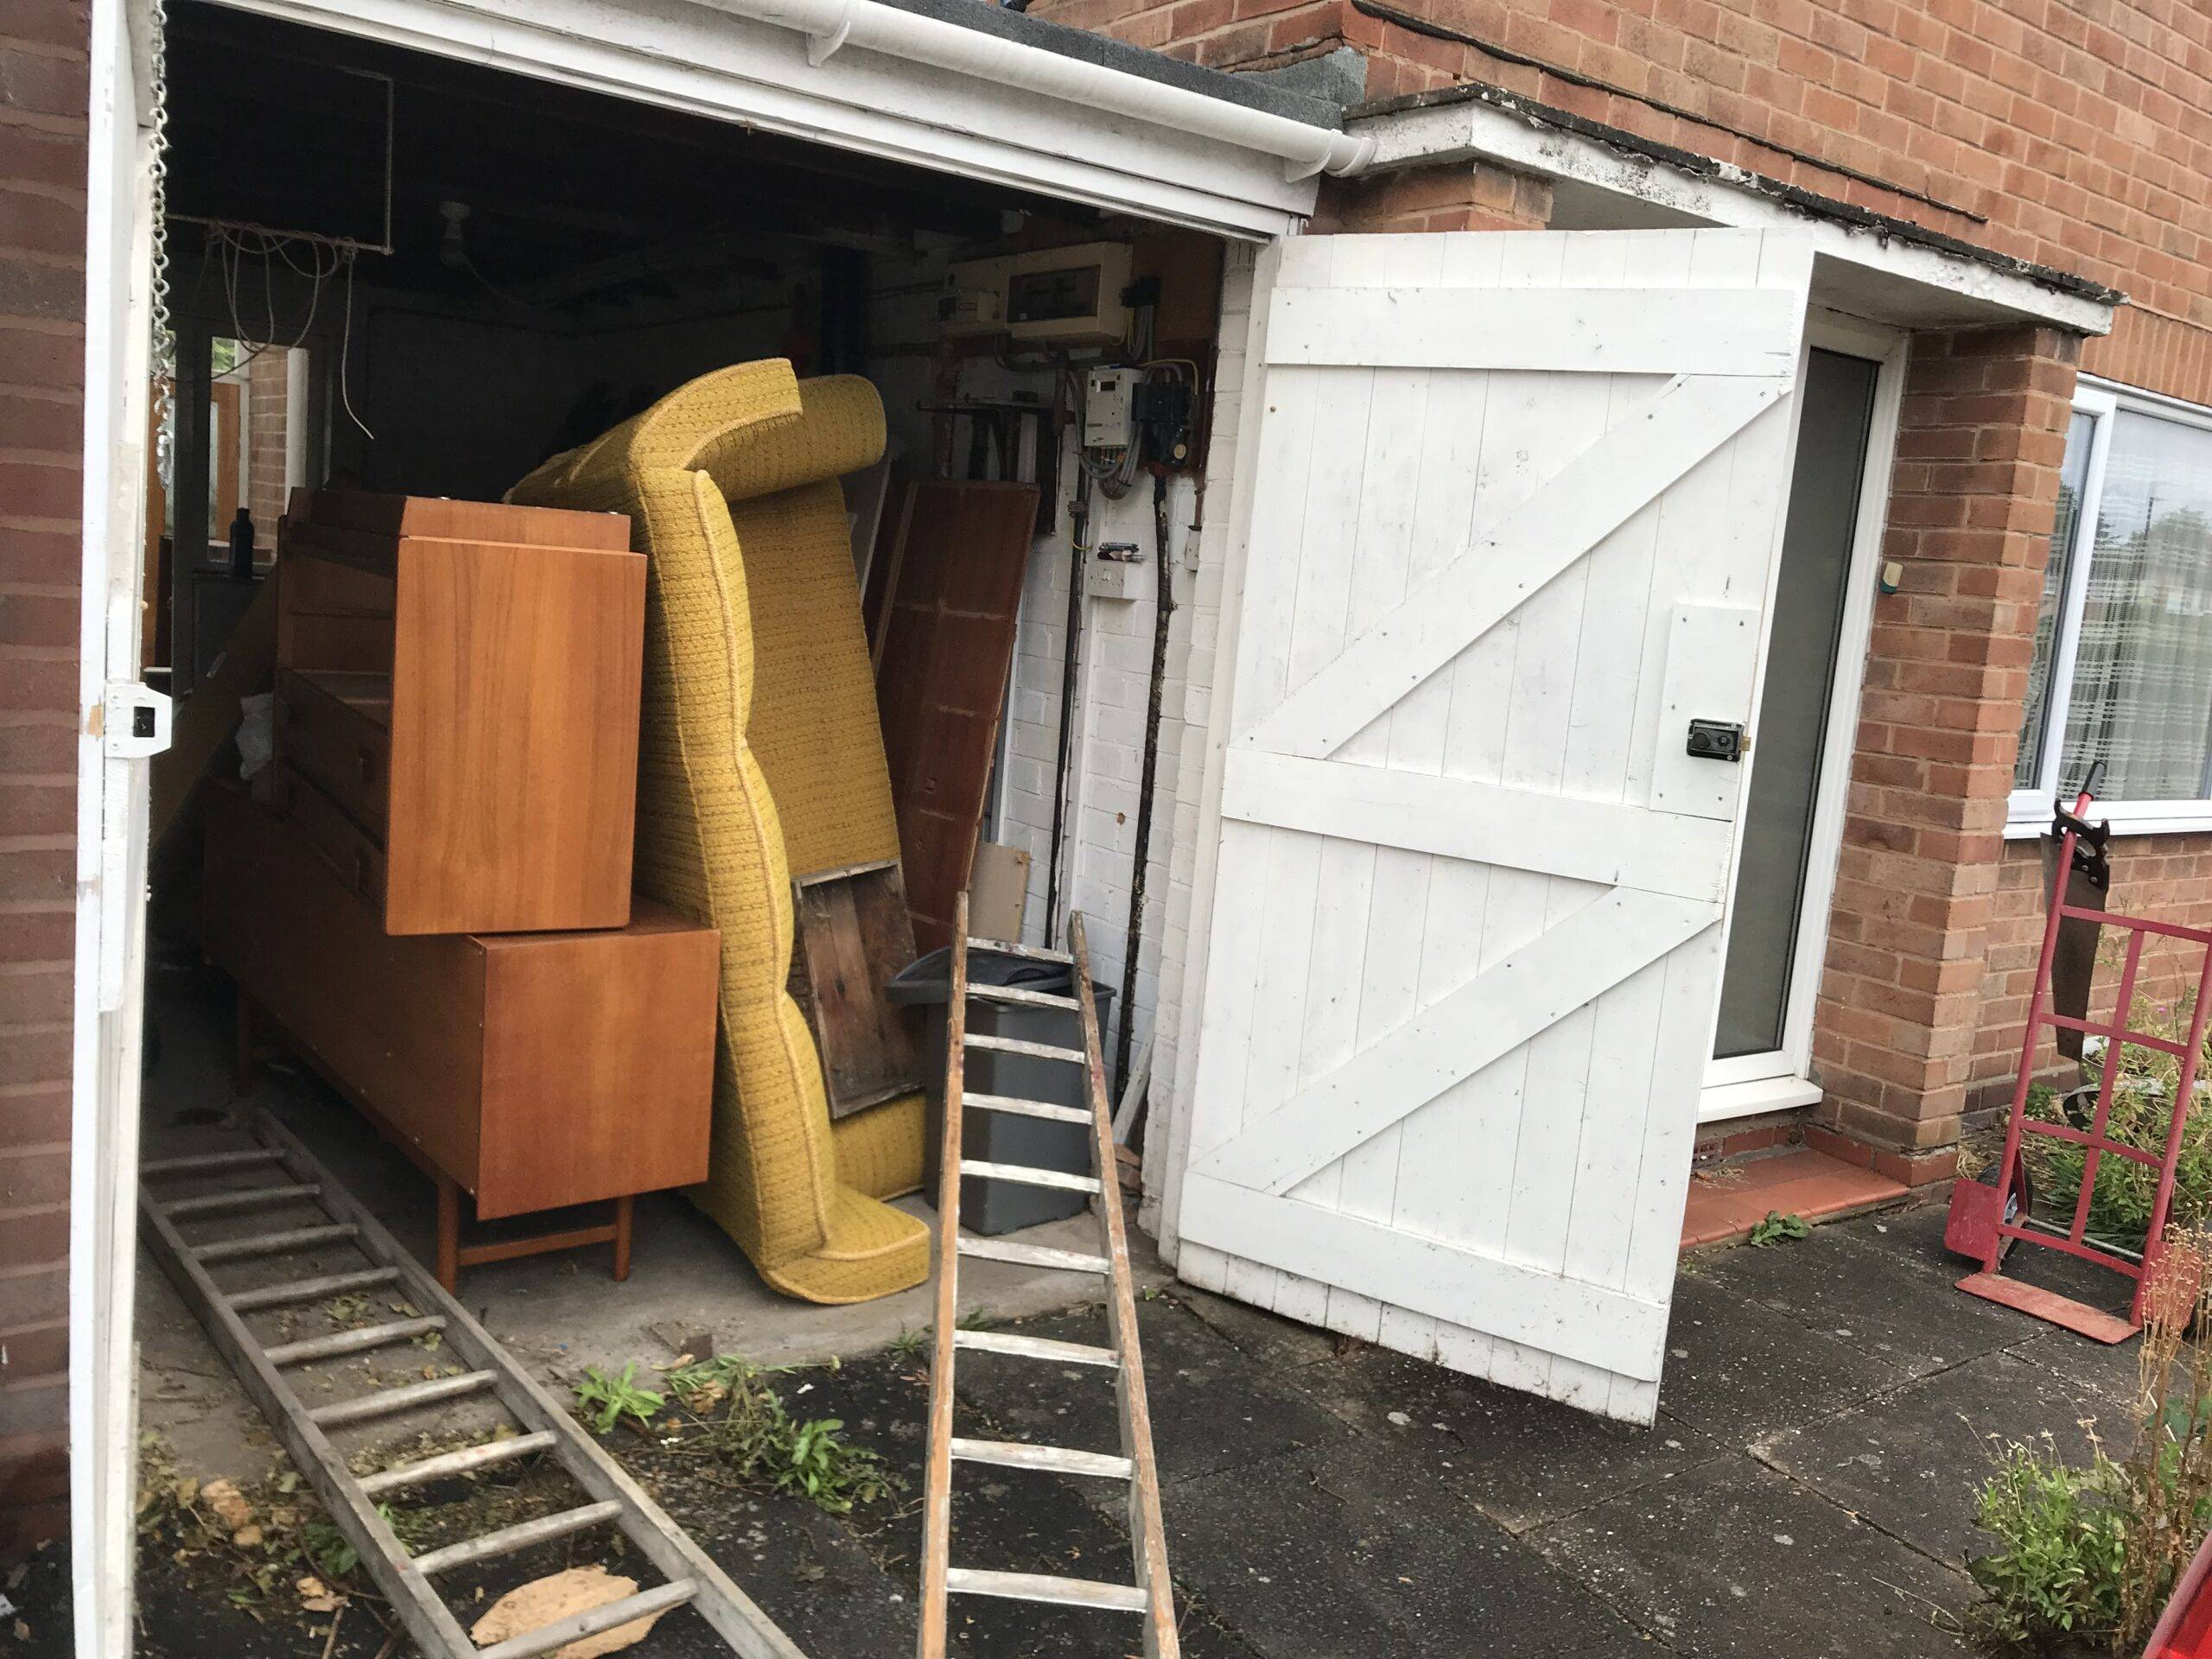 Mere Green house clearance services. Bereavement clearance and hoarded home clearance services. Items in garage ready for removal and recycling.